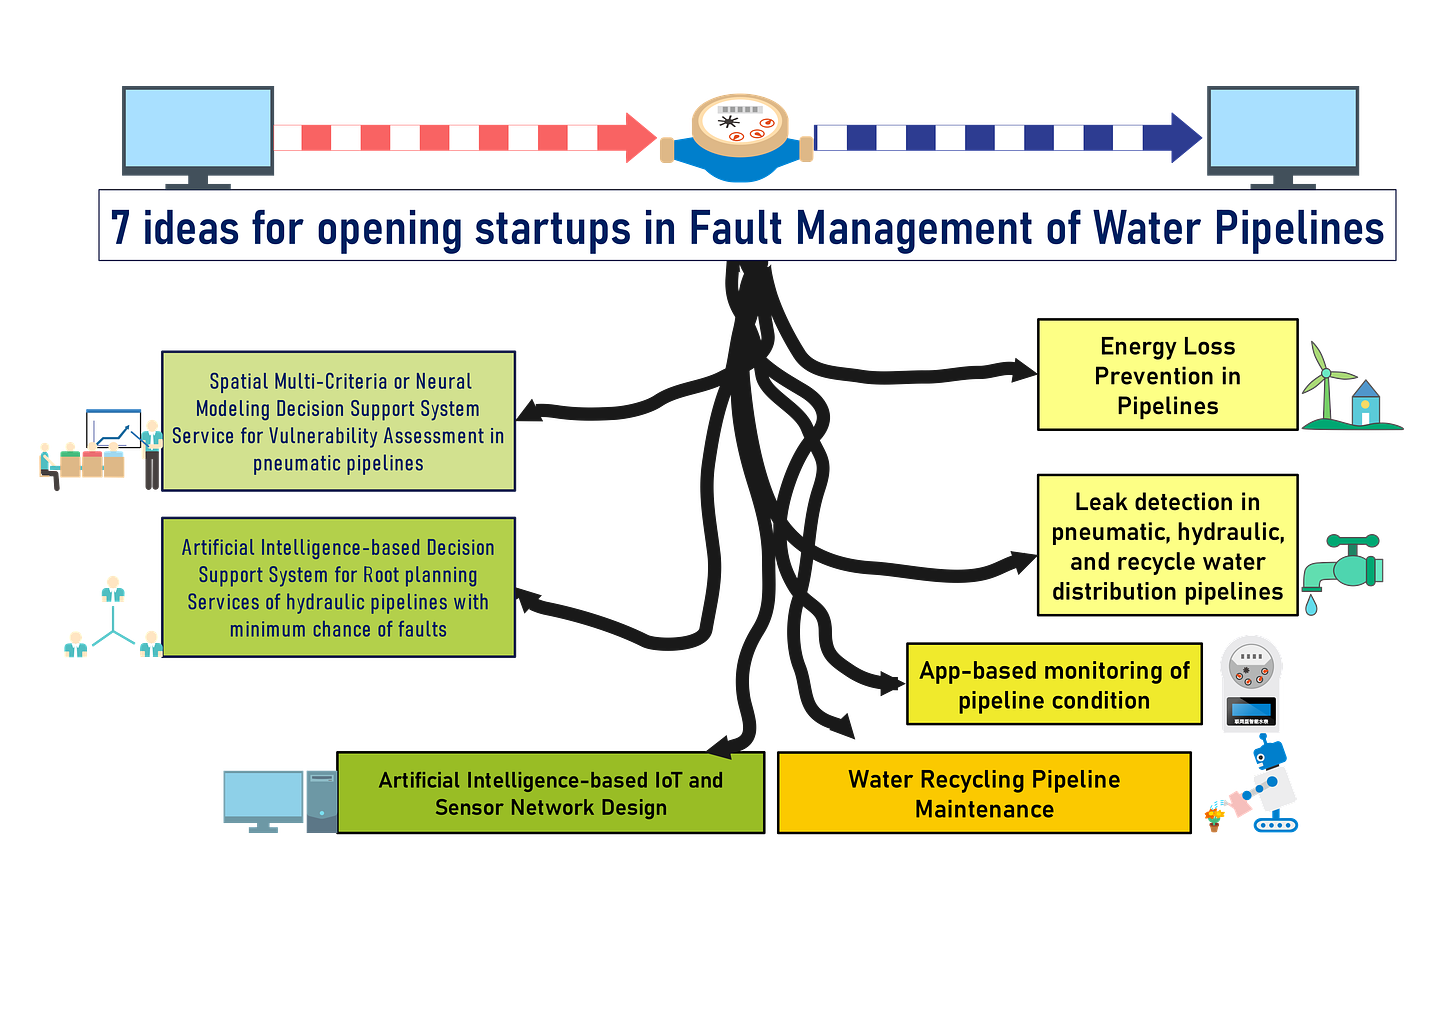 7 ideas for opening startups in Fault Management of Water Pipelines